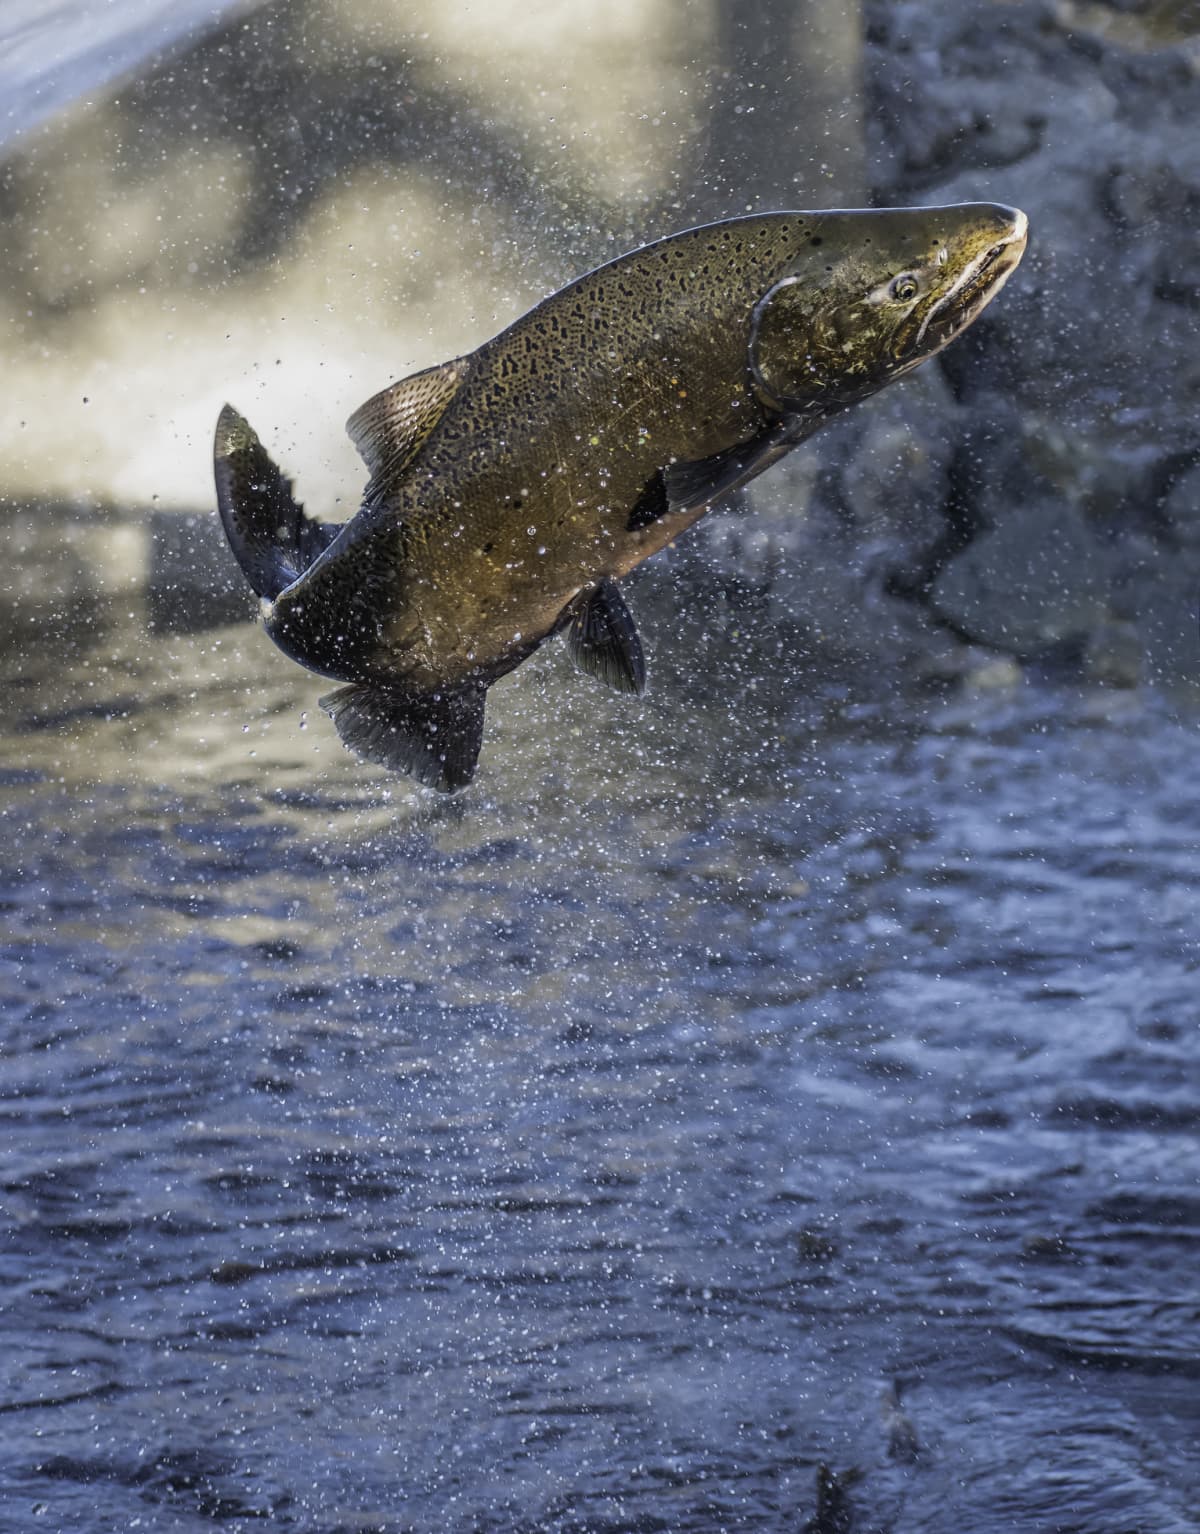 Salmon leaping from the water